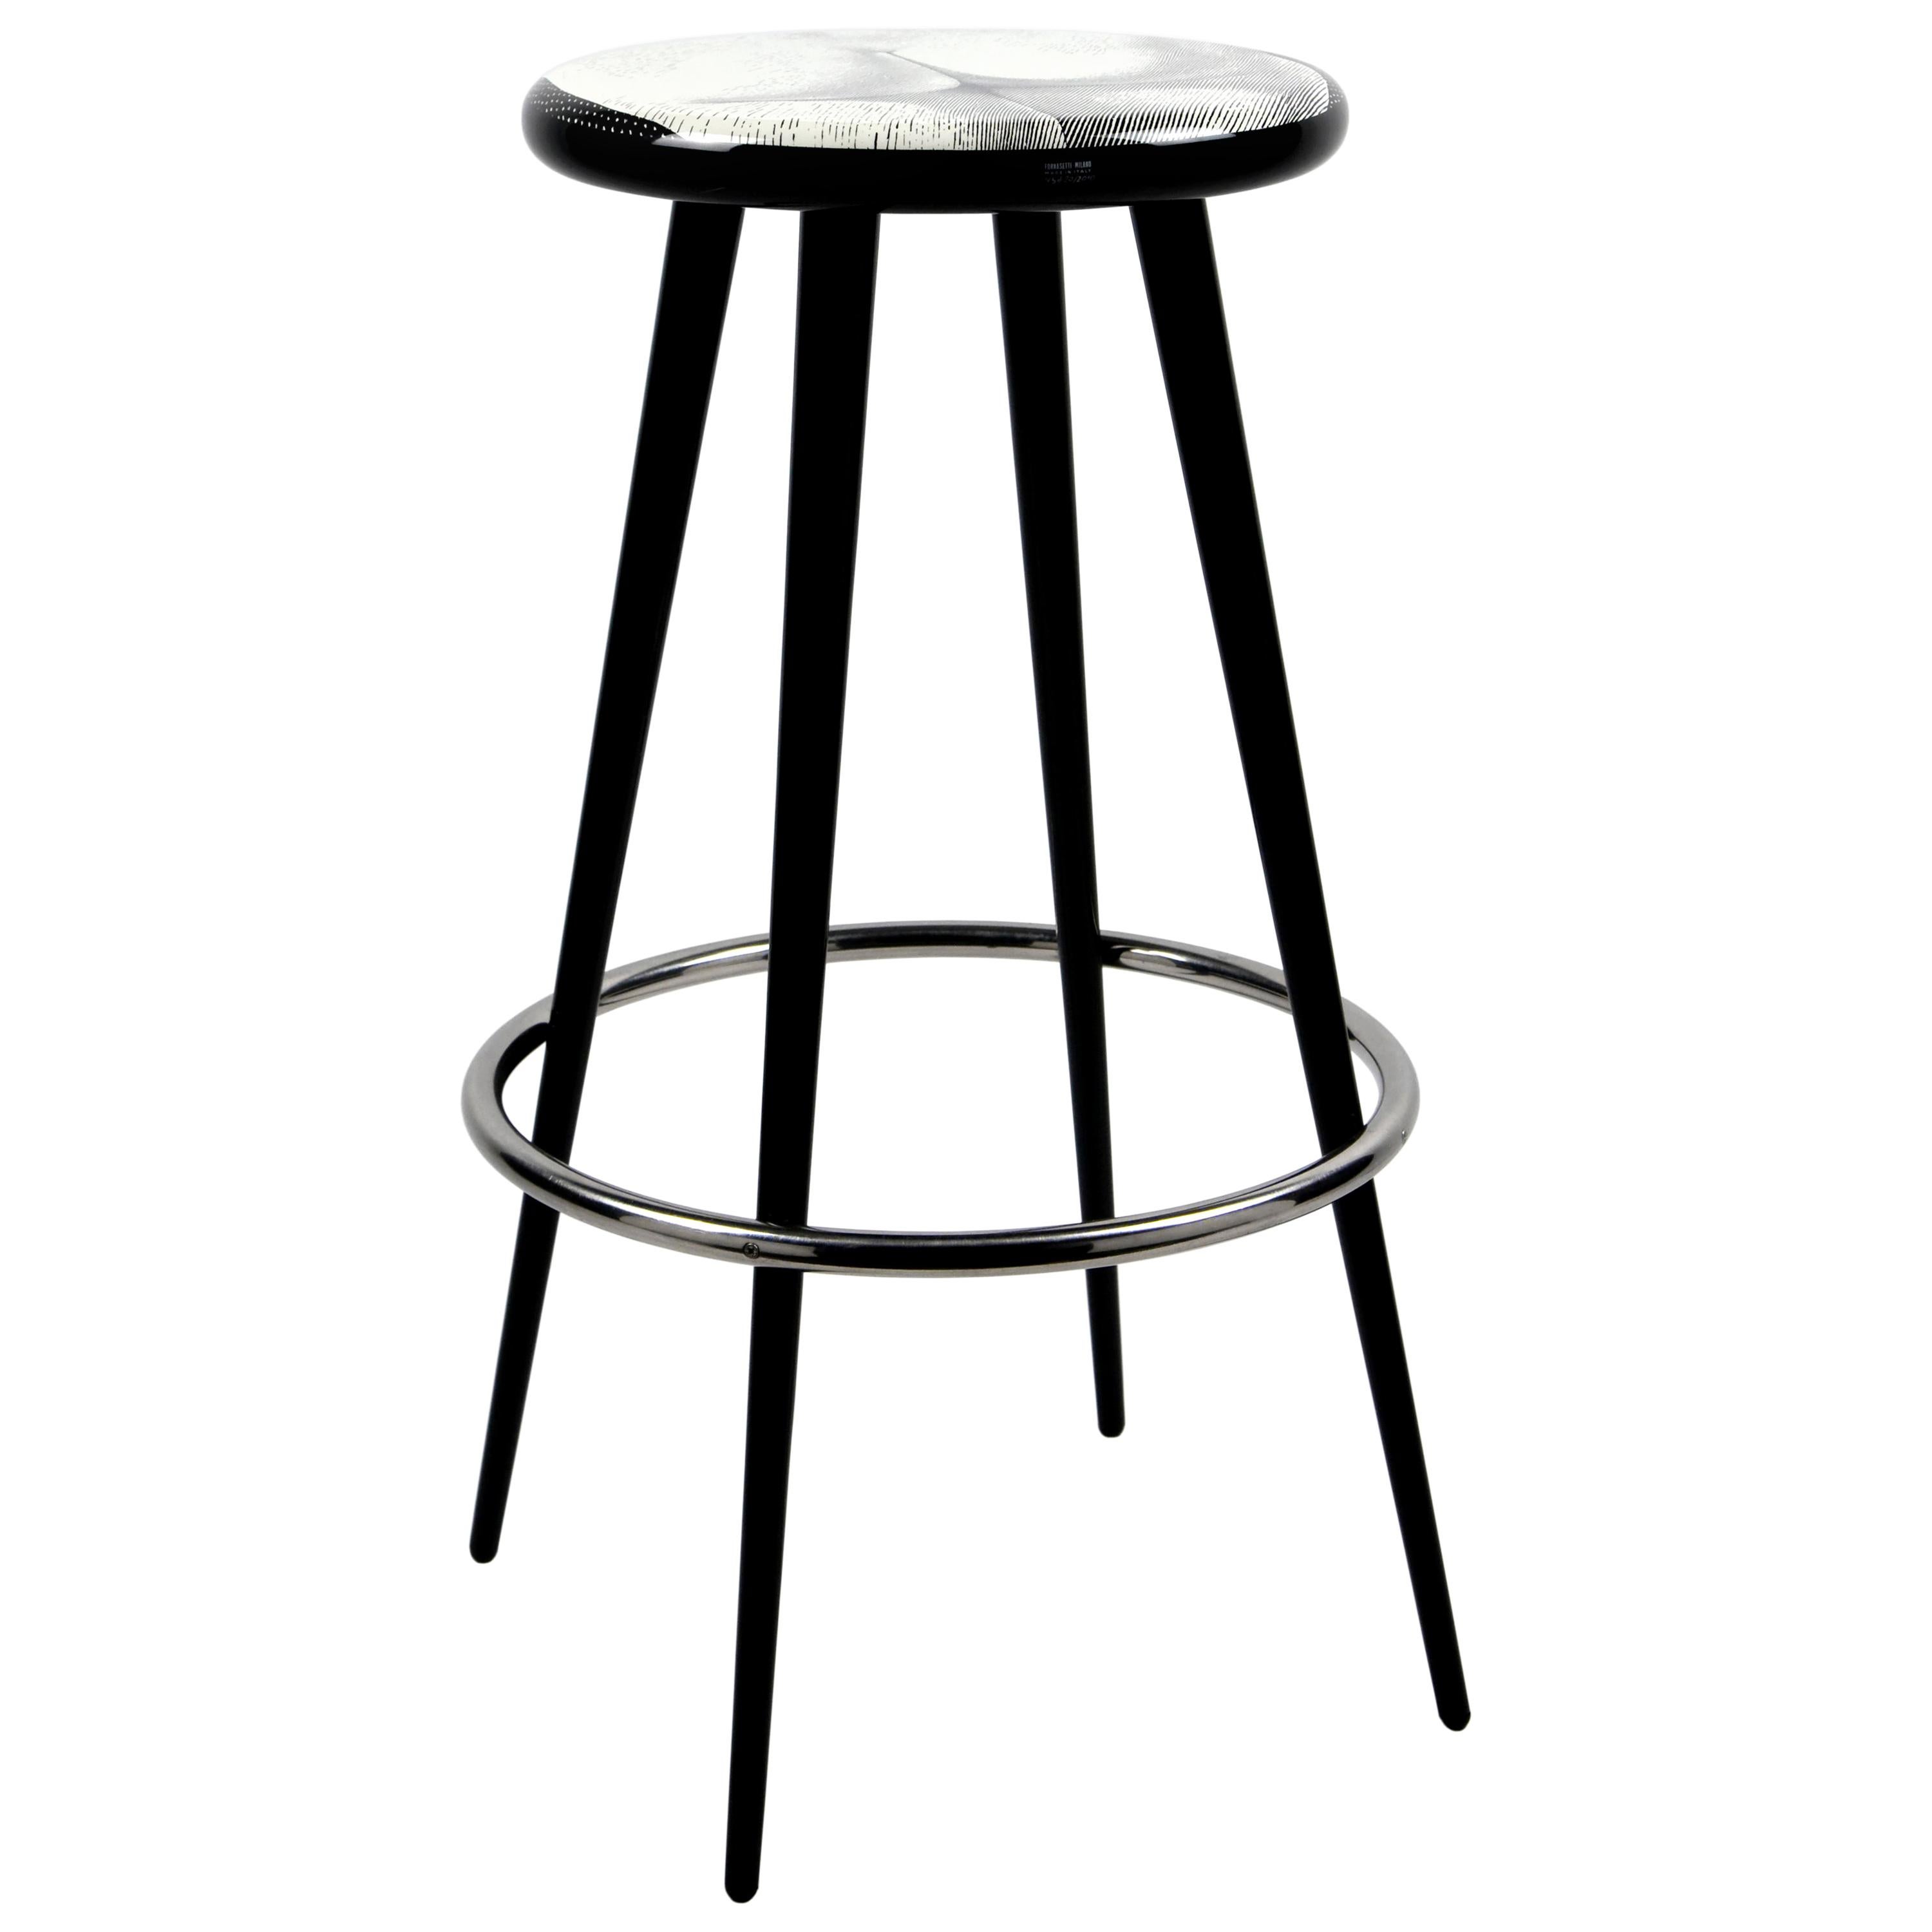 Fornasetti Bar Stool Tergonomico Handcrafted Black and White Wood